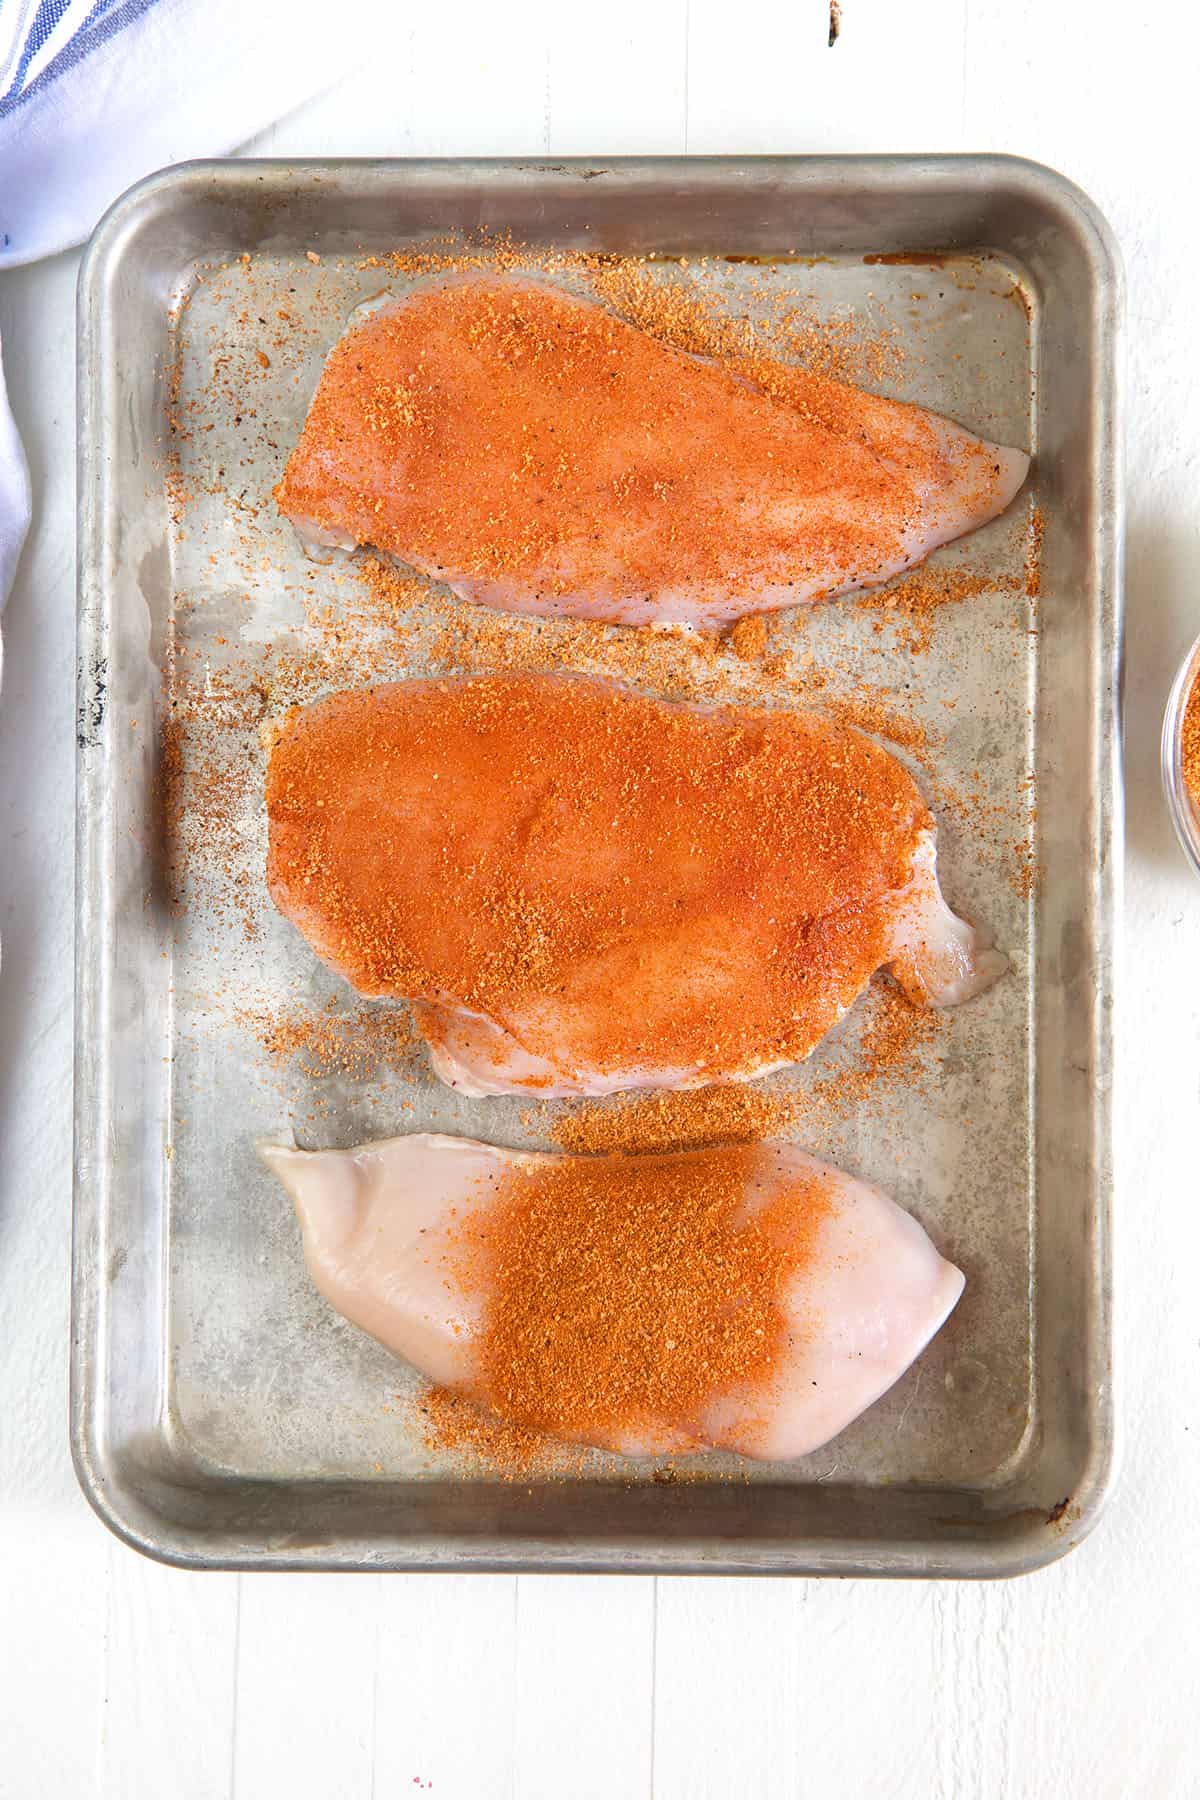 Three chicken breasts have been seasoned and are presented on a baking sheet.